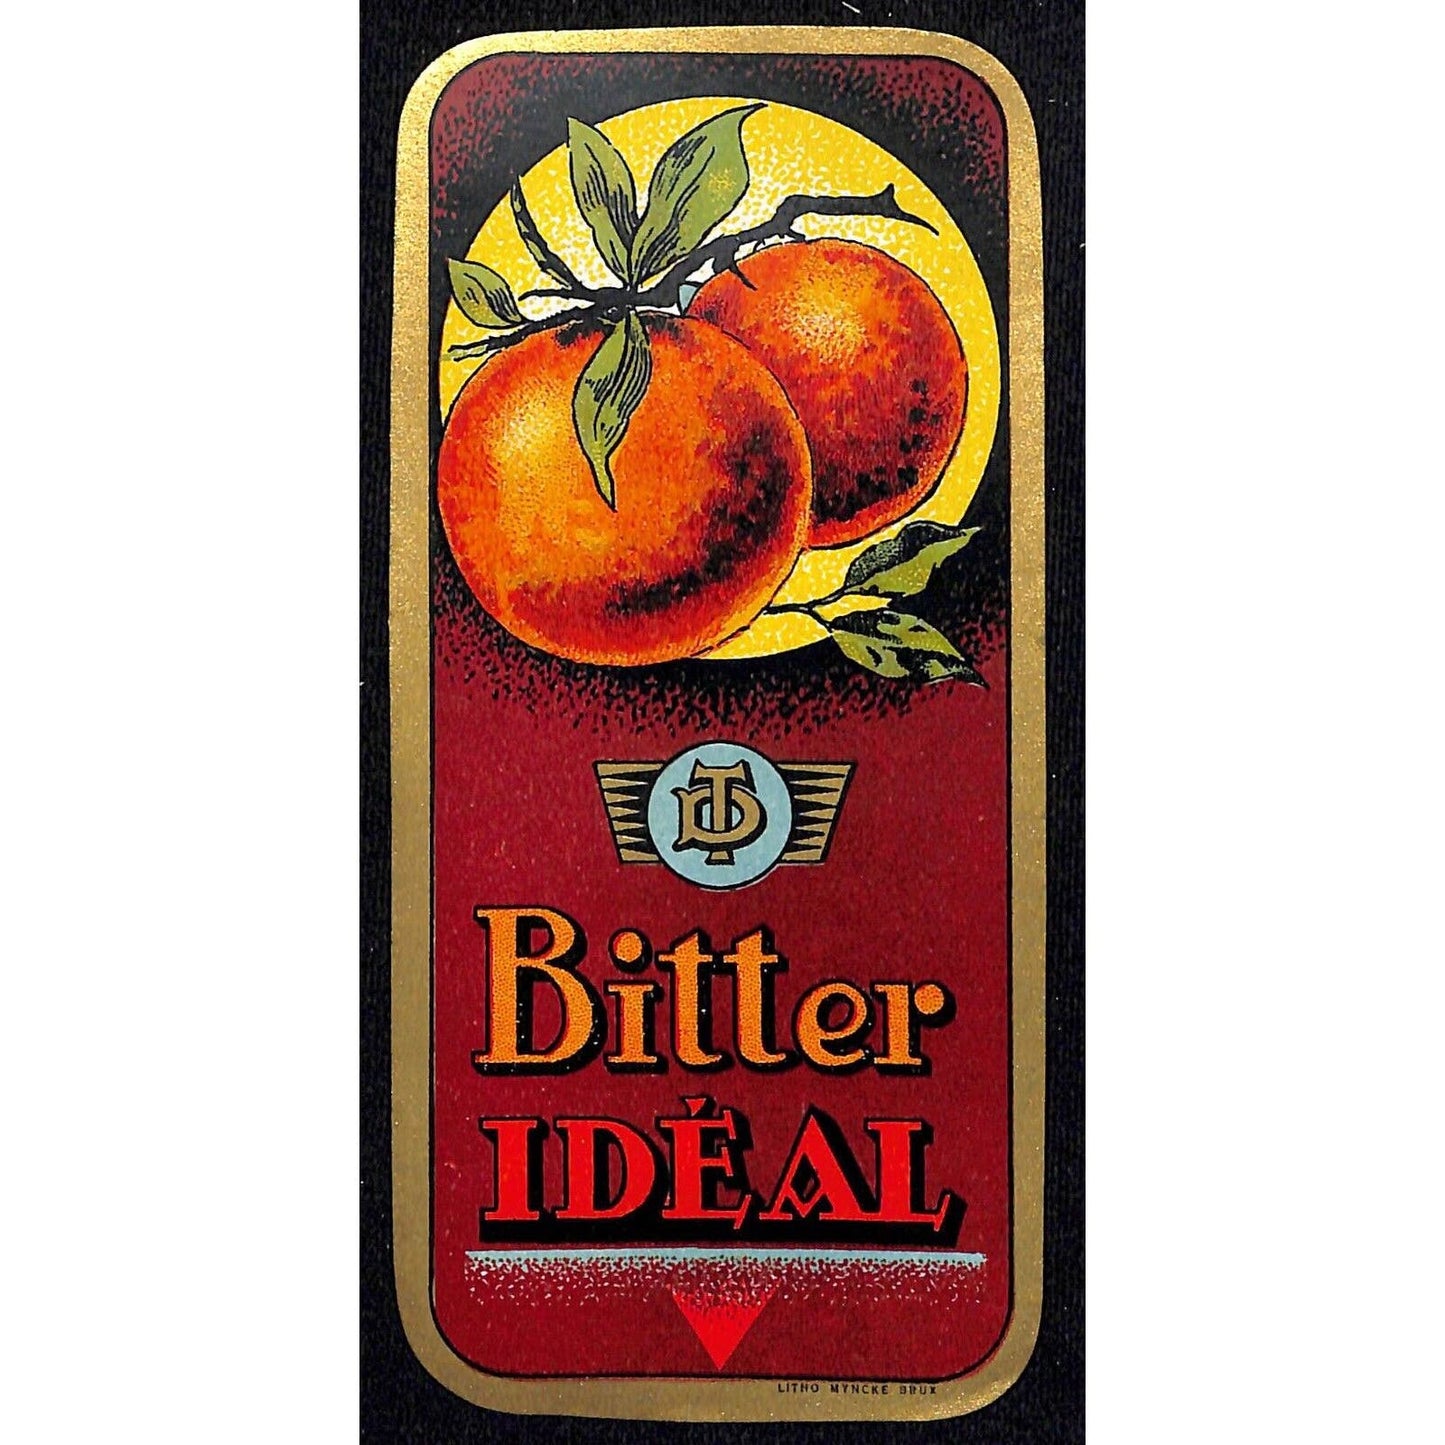 Ideal Bitter French Paper Label NOS VGC w/ Gilt Border